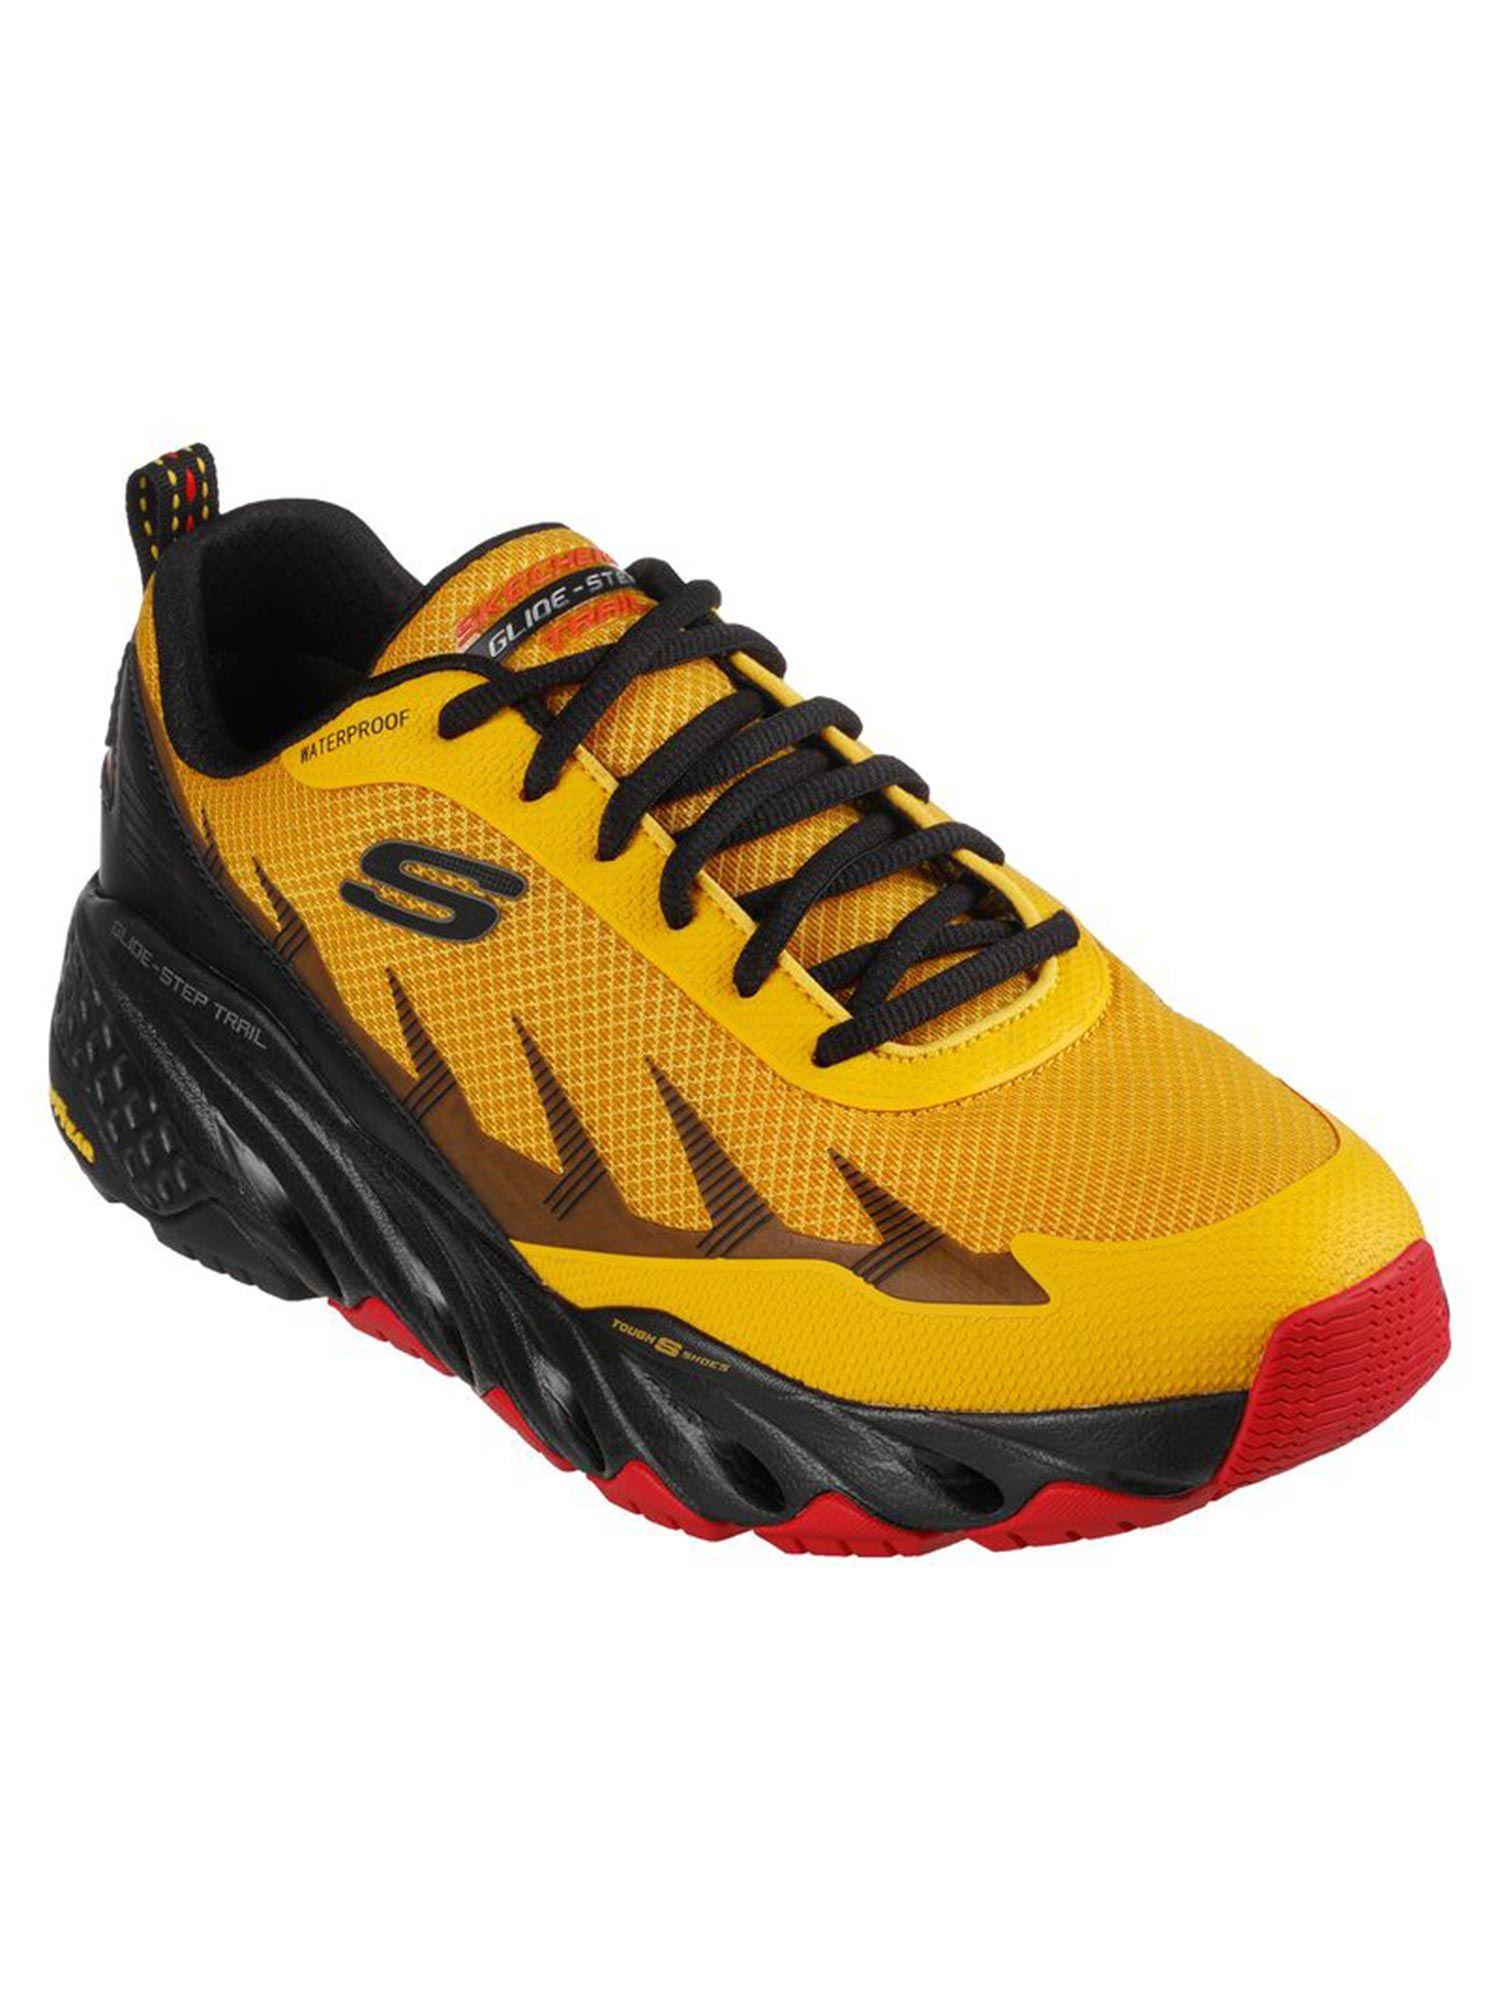 glide-step-trail---botanic-yellow-street-casual-shoes